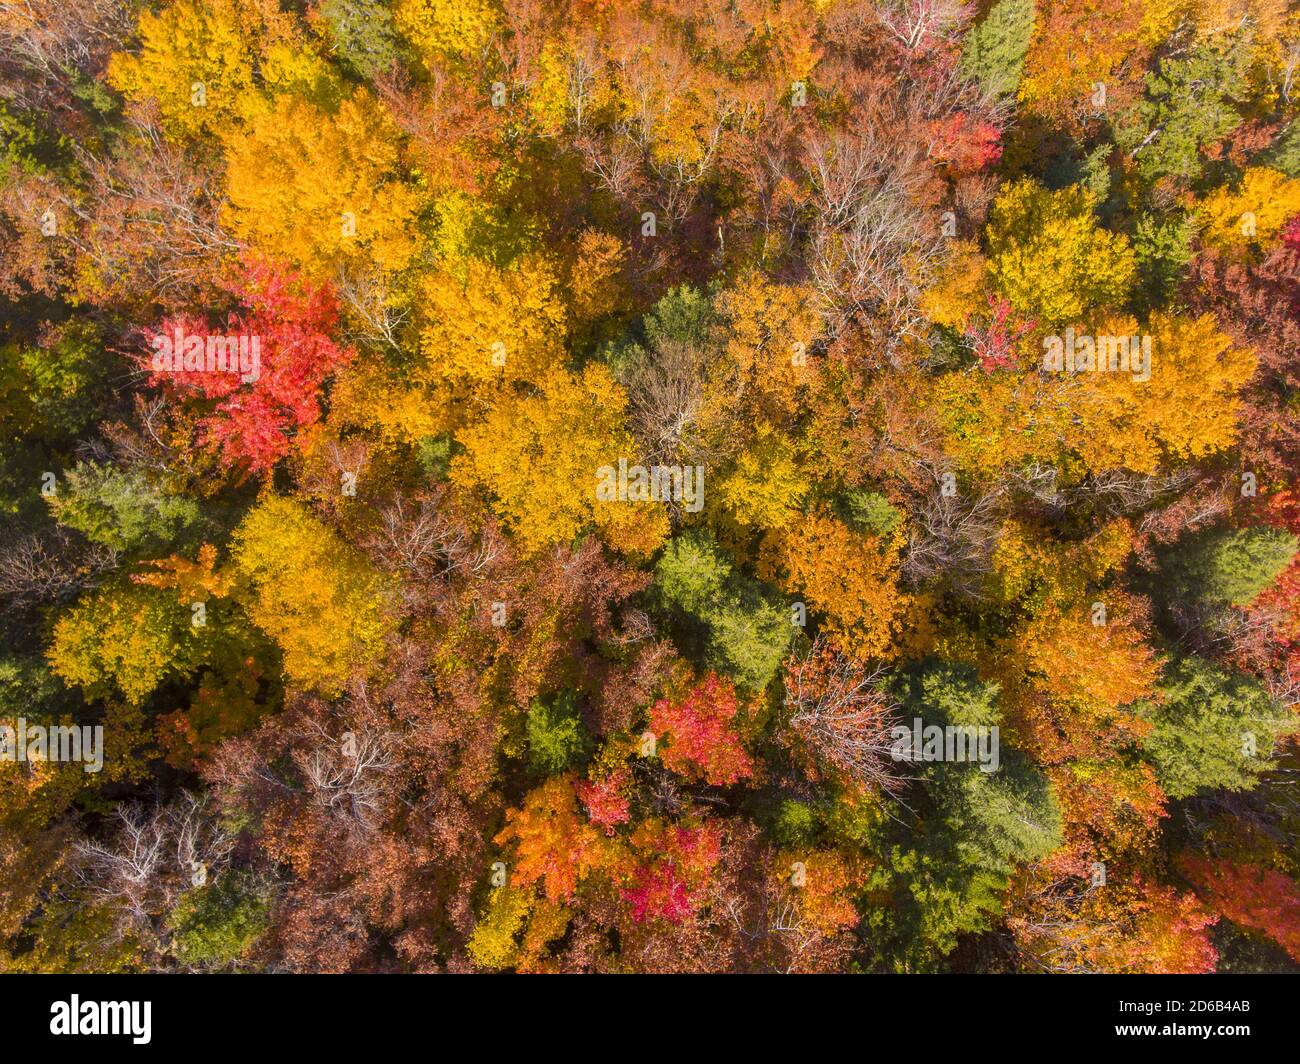 White Mountain National Forest fall foliage near Kancamagus Highway aerial view near Sugar Hill Scenic Vista, Town of Lincoln, New Hampshire NH, USA. Stock Photo